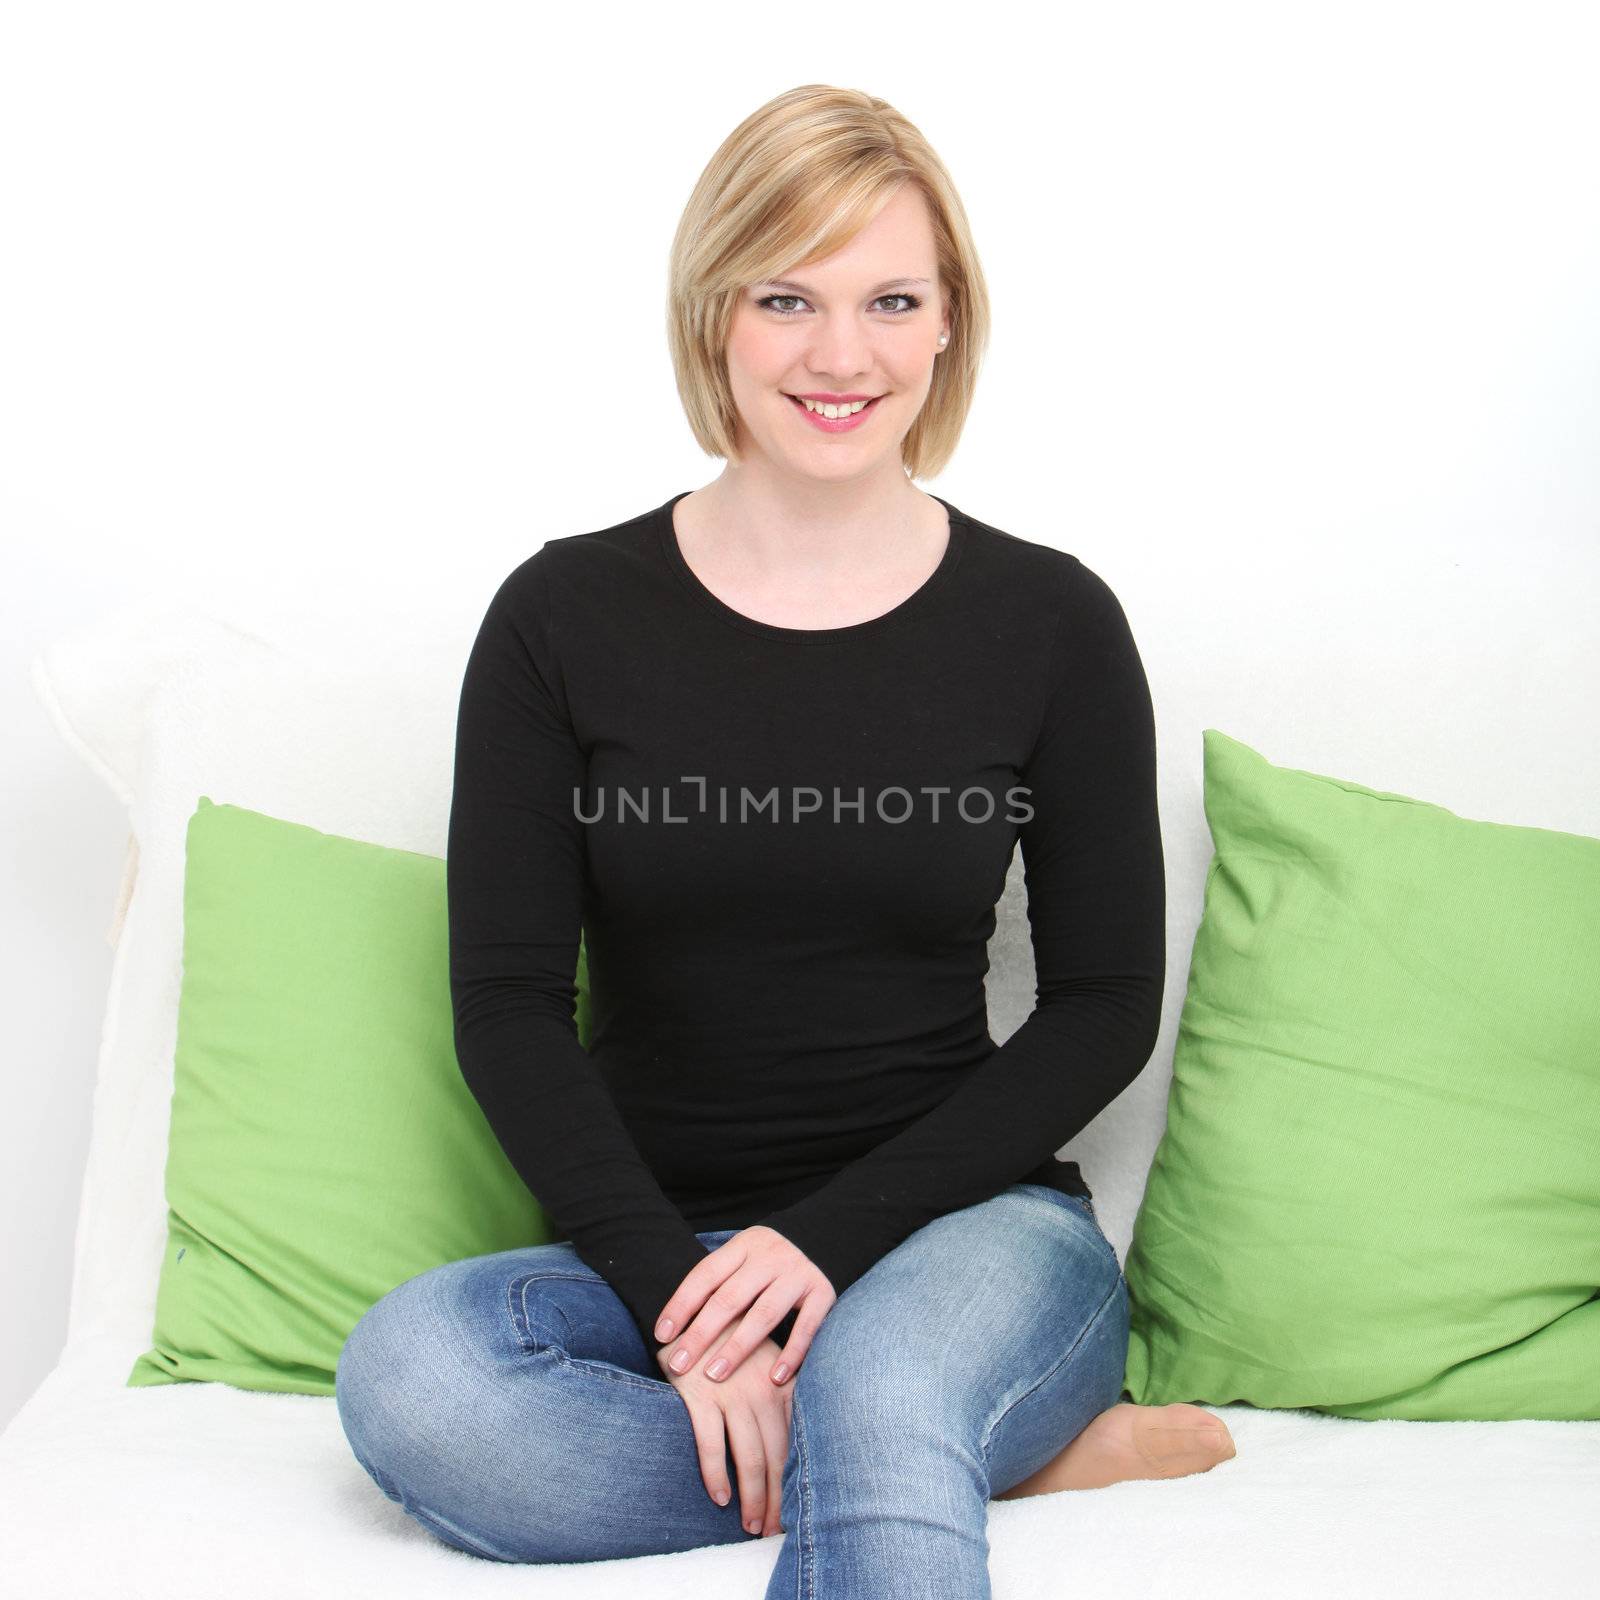 Pretty relaxed woman sitting on a couch with her bare foot tucked up under her wearing jeans and a casual black top